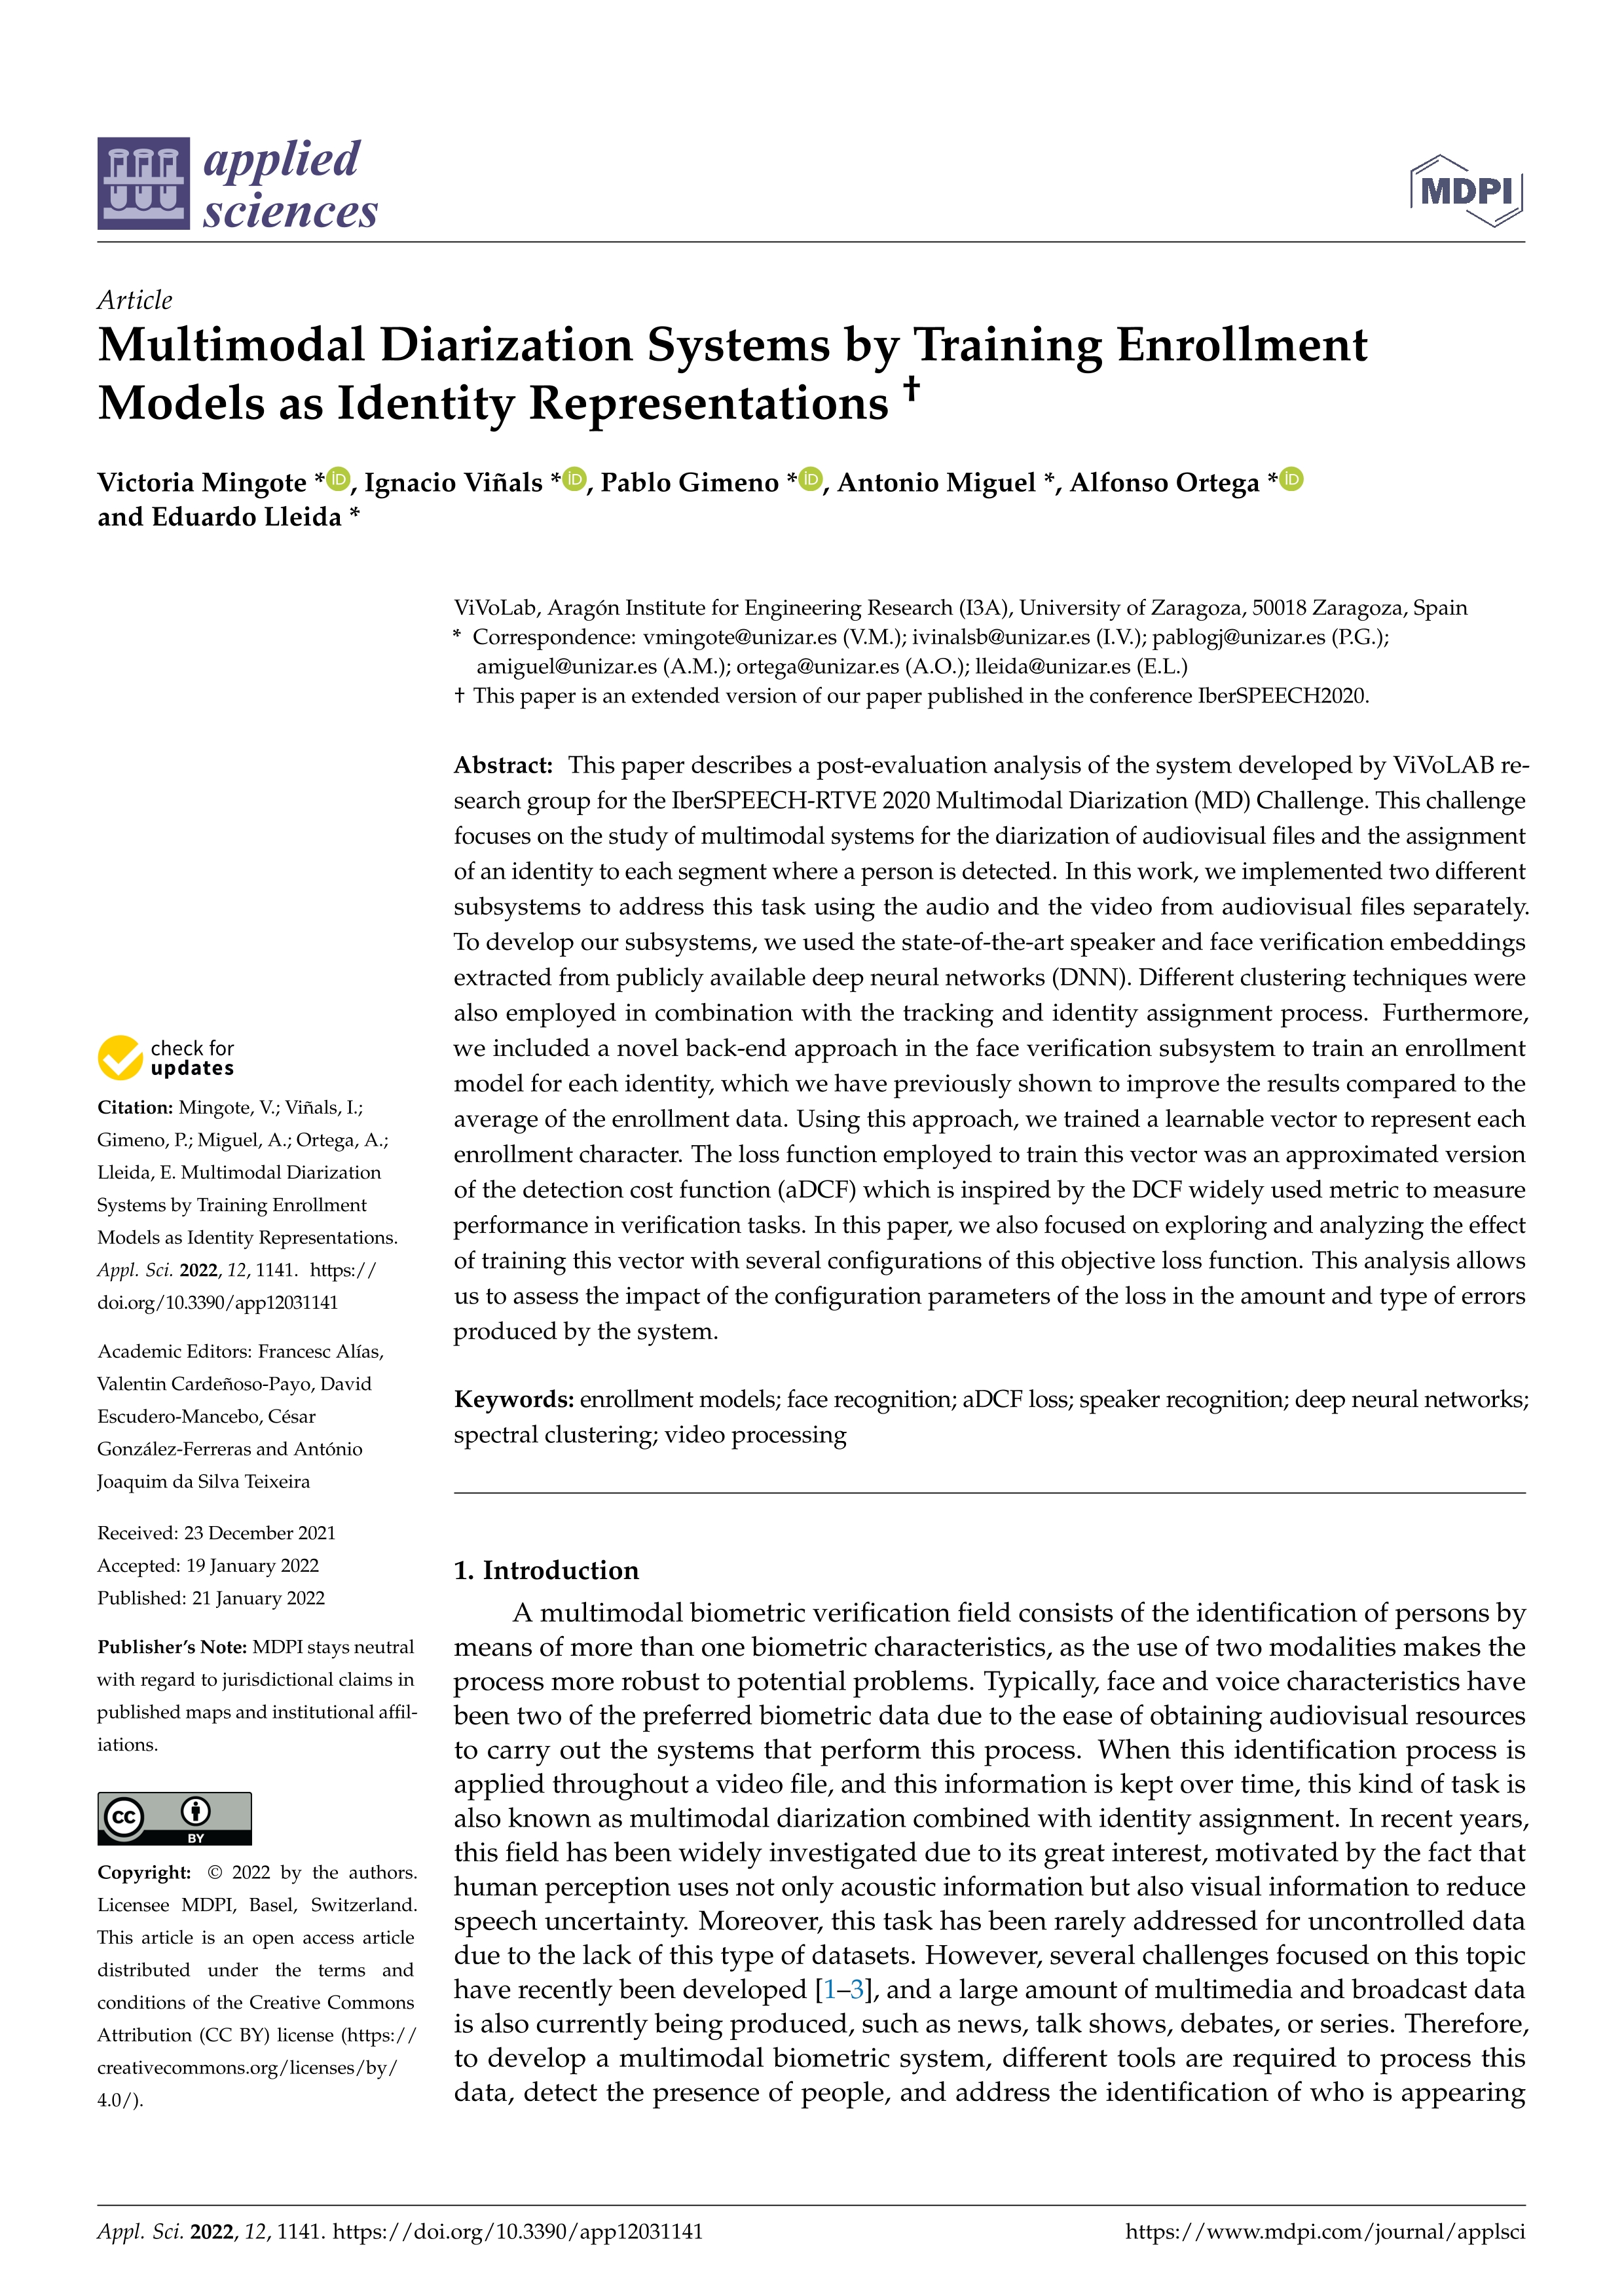 Multimodal Diarization Systems by Training Enrollment Models as Identity Representations